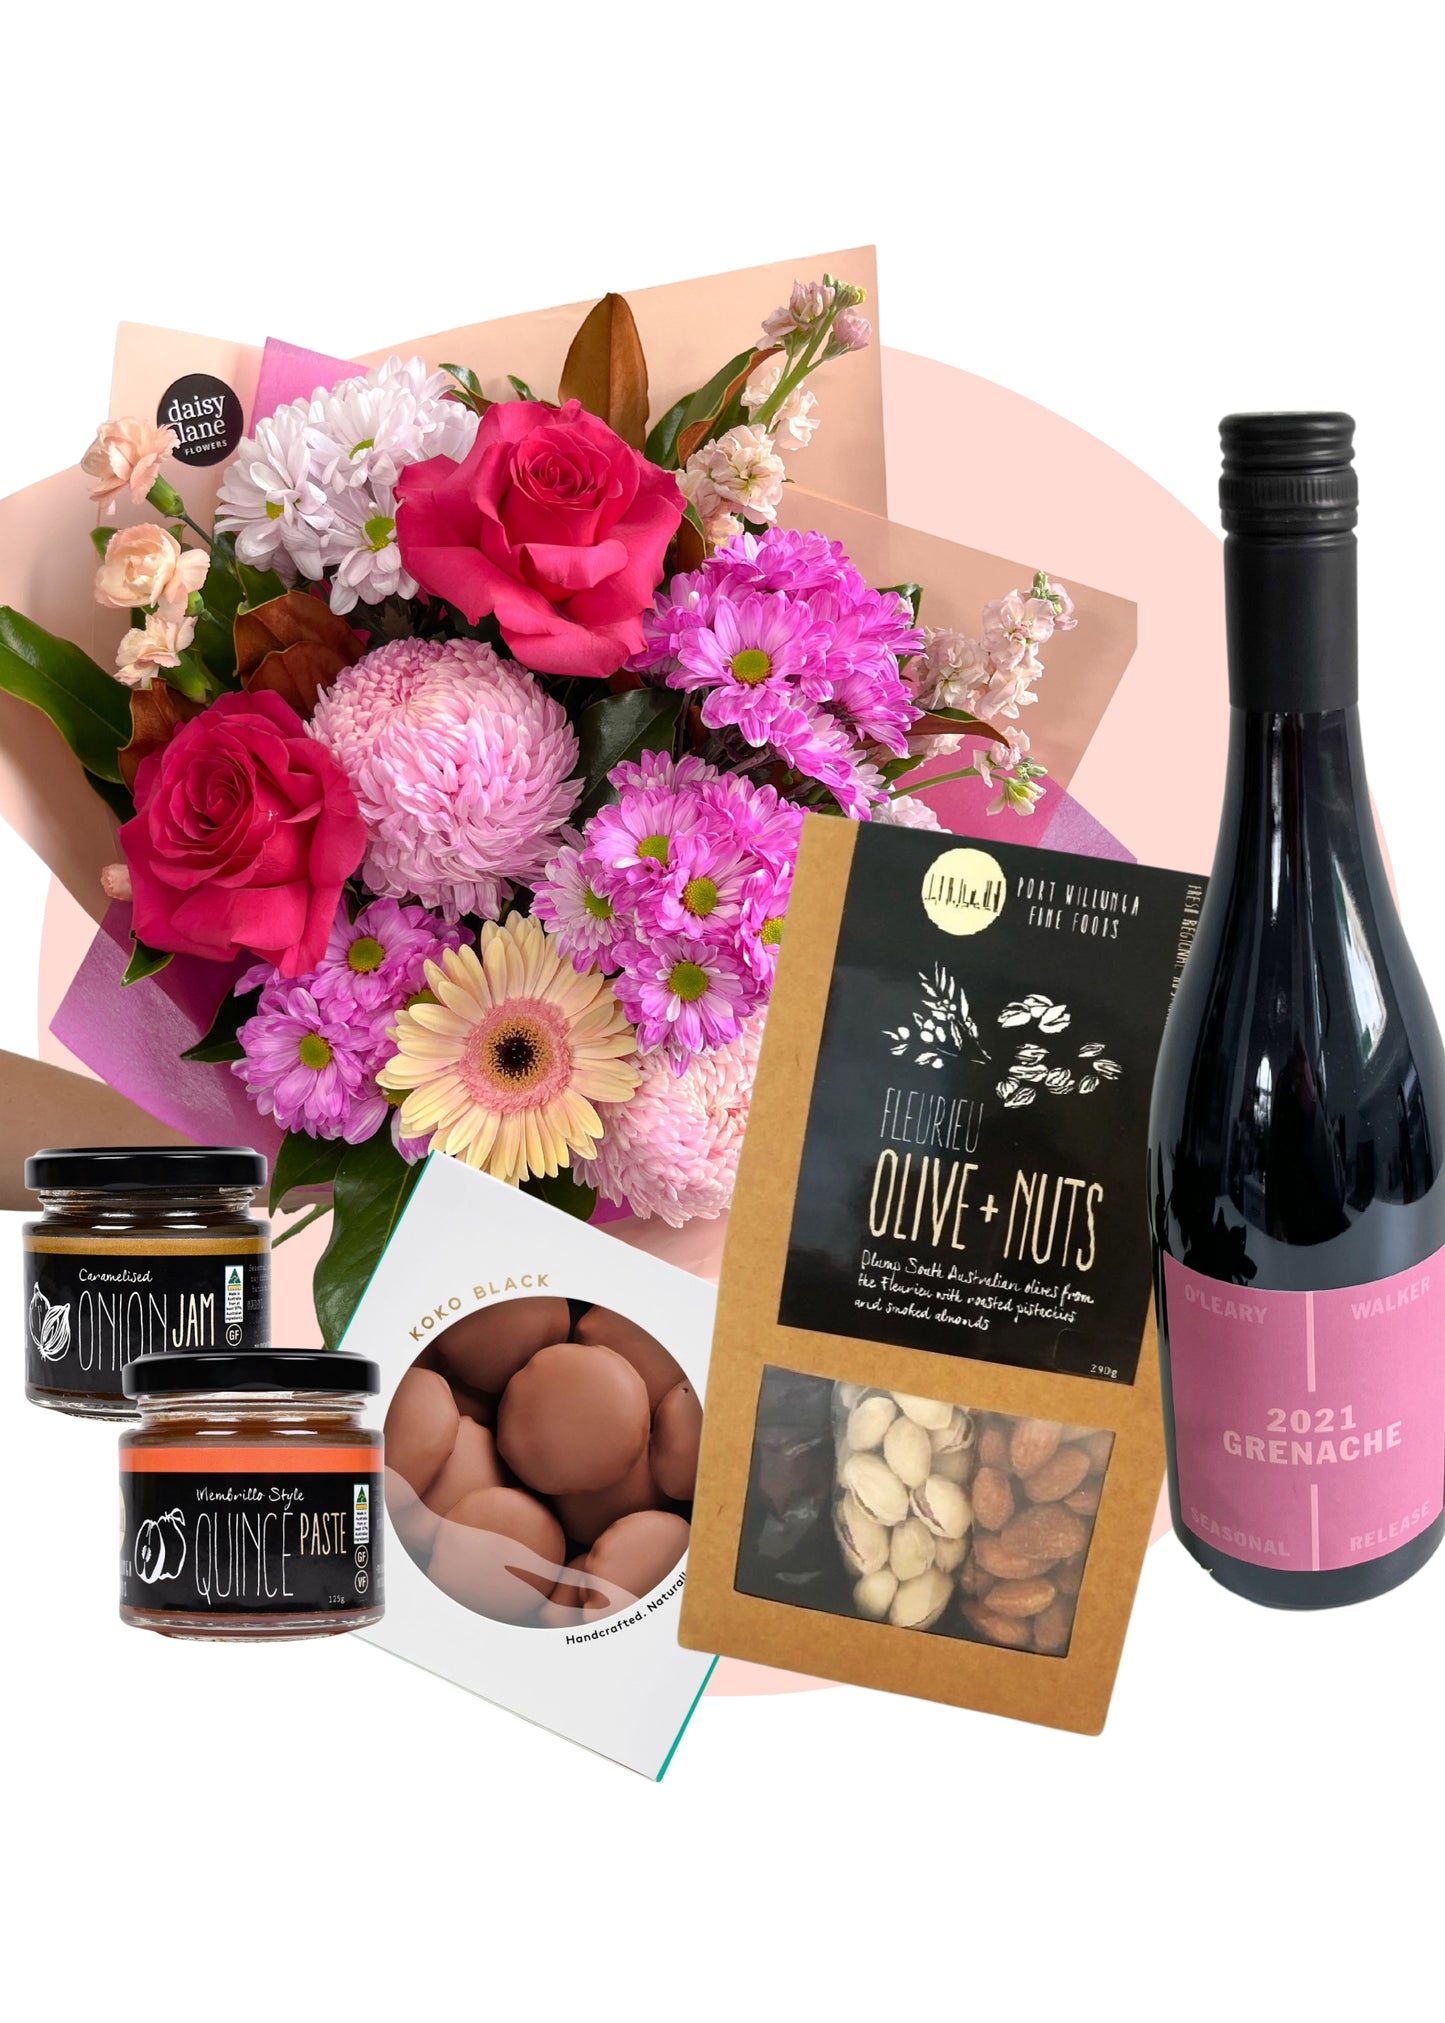 Mother's Day Bouquet with Wine Hamper